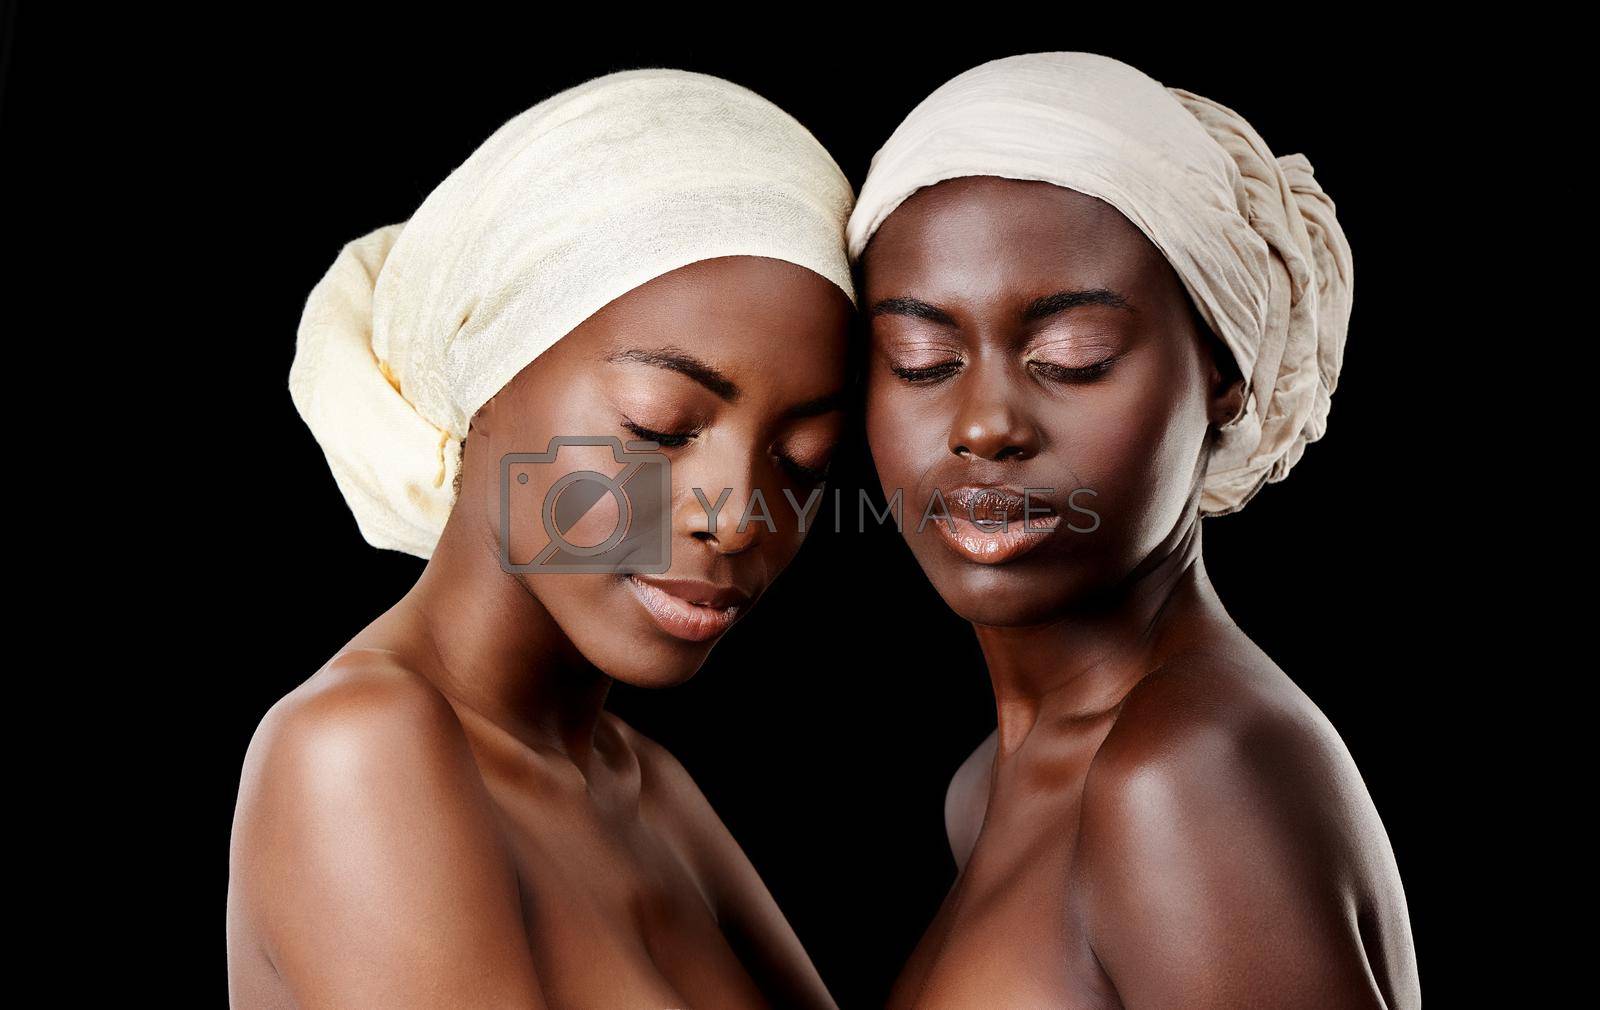 Royalty free image of Two peas in a pod. Studio shot of two beautiful women wearing headscarves against a black background. by YuriArcurs